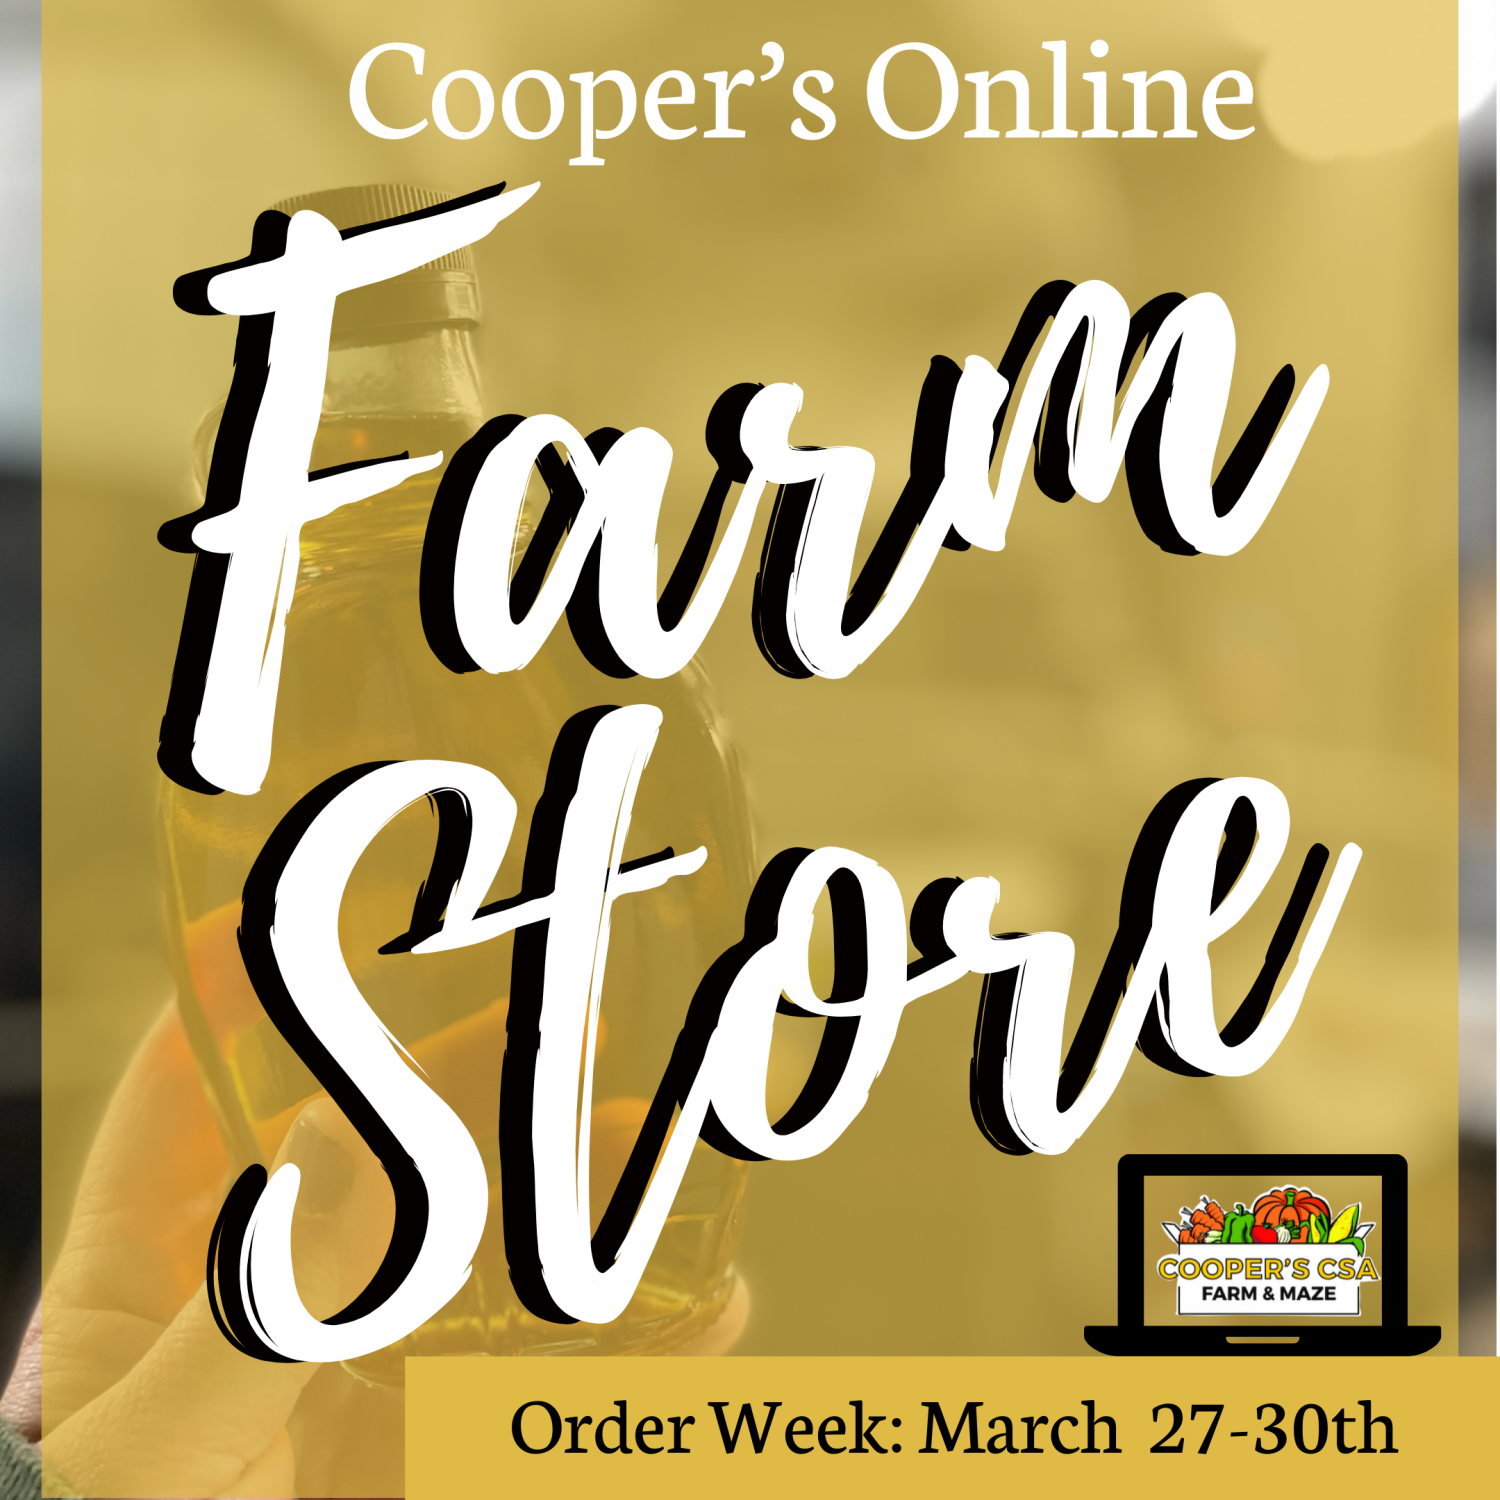 Coopers Online Farm Stand- Order Week March 27-30th